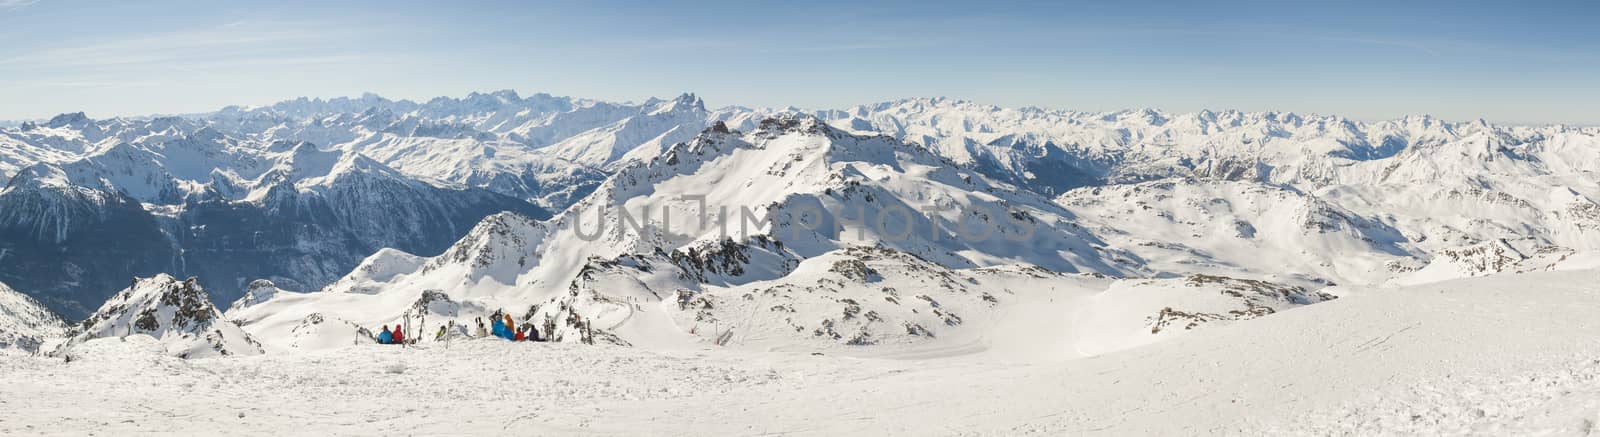 View down a snowy piste with skiers relaxing and view over mountain valley